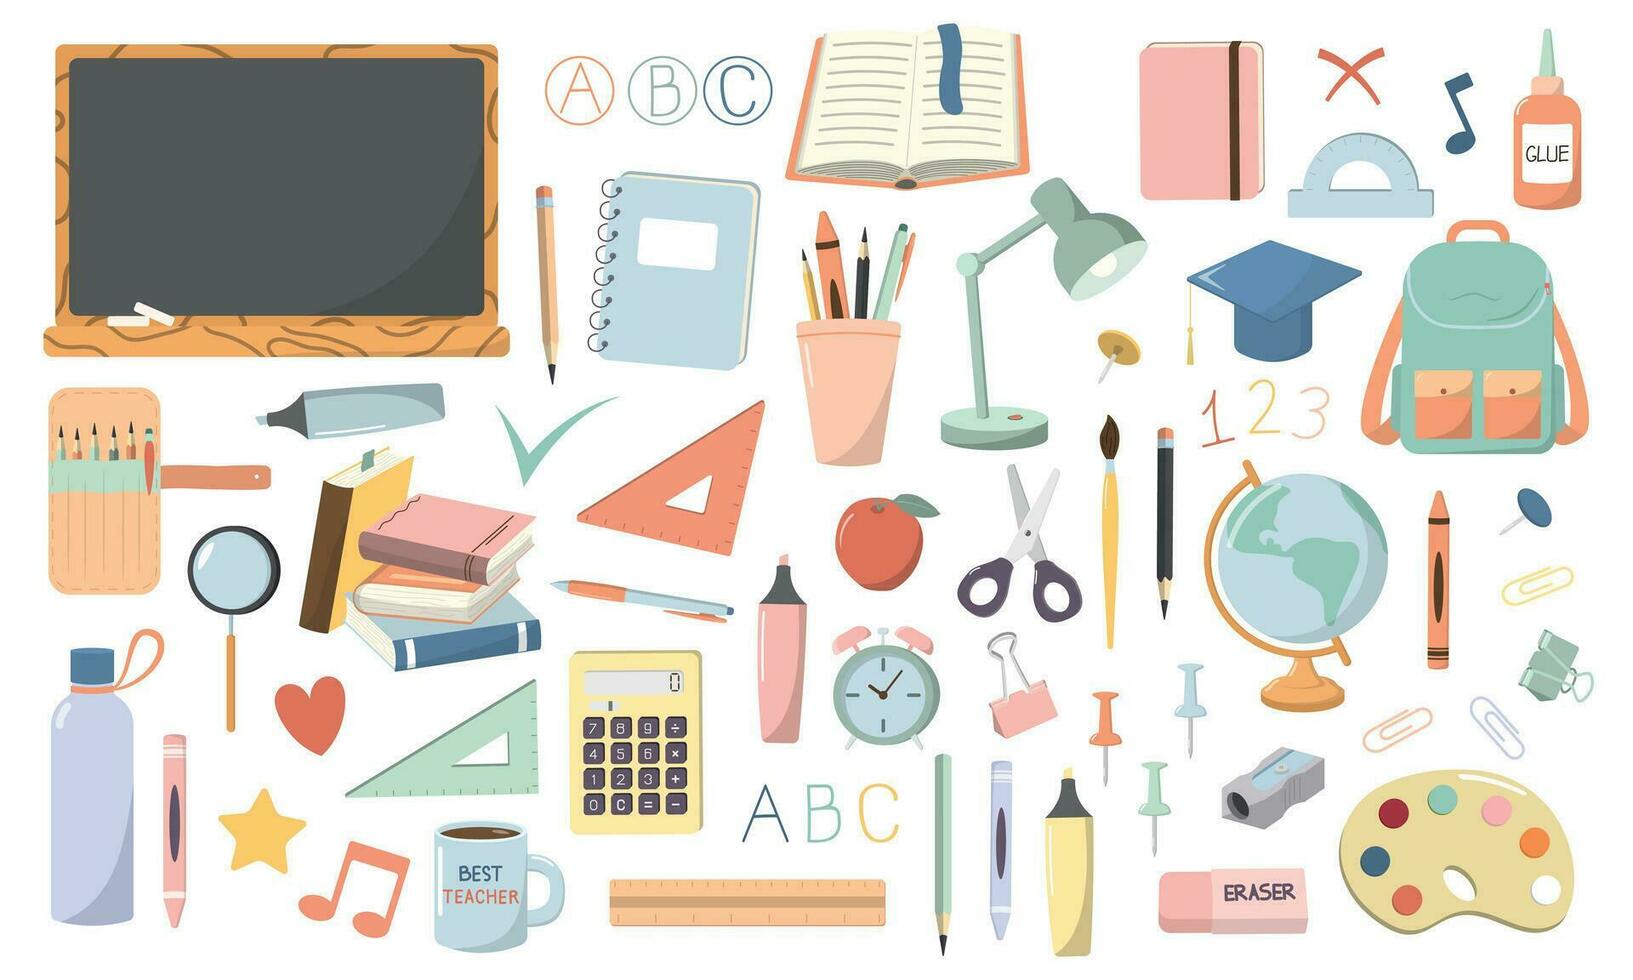 Set of cartoon school stationery, items, accessories, and elements for education. Vector illustration. Isolated on white background. Back to school theme